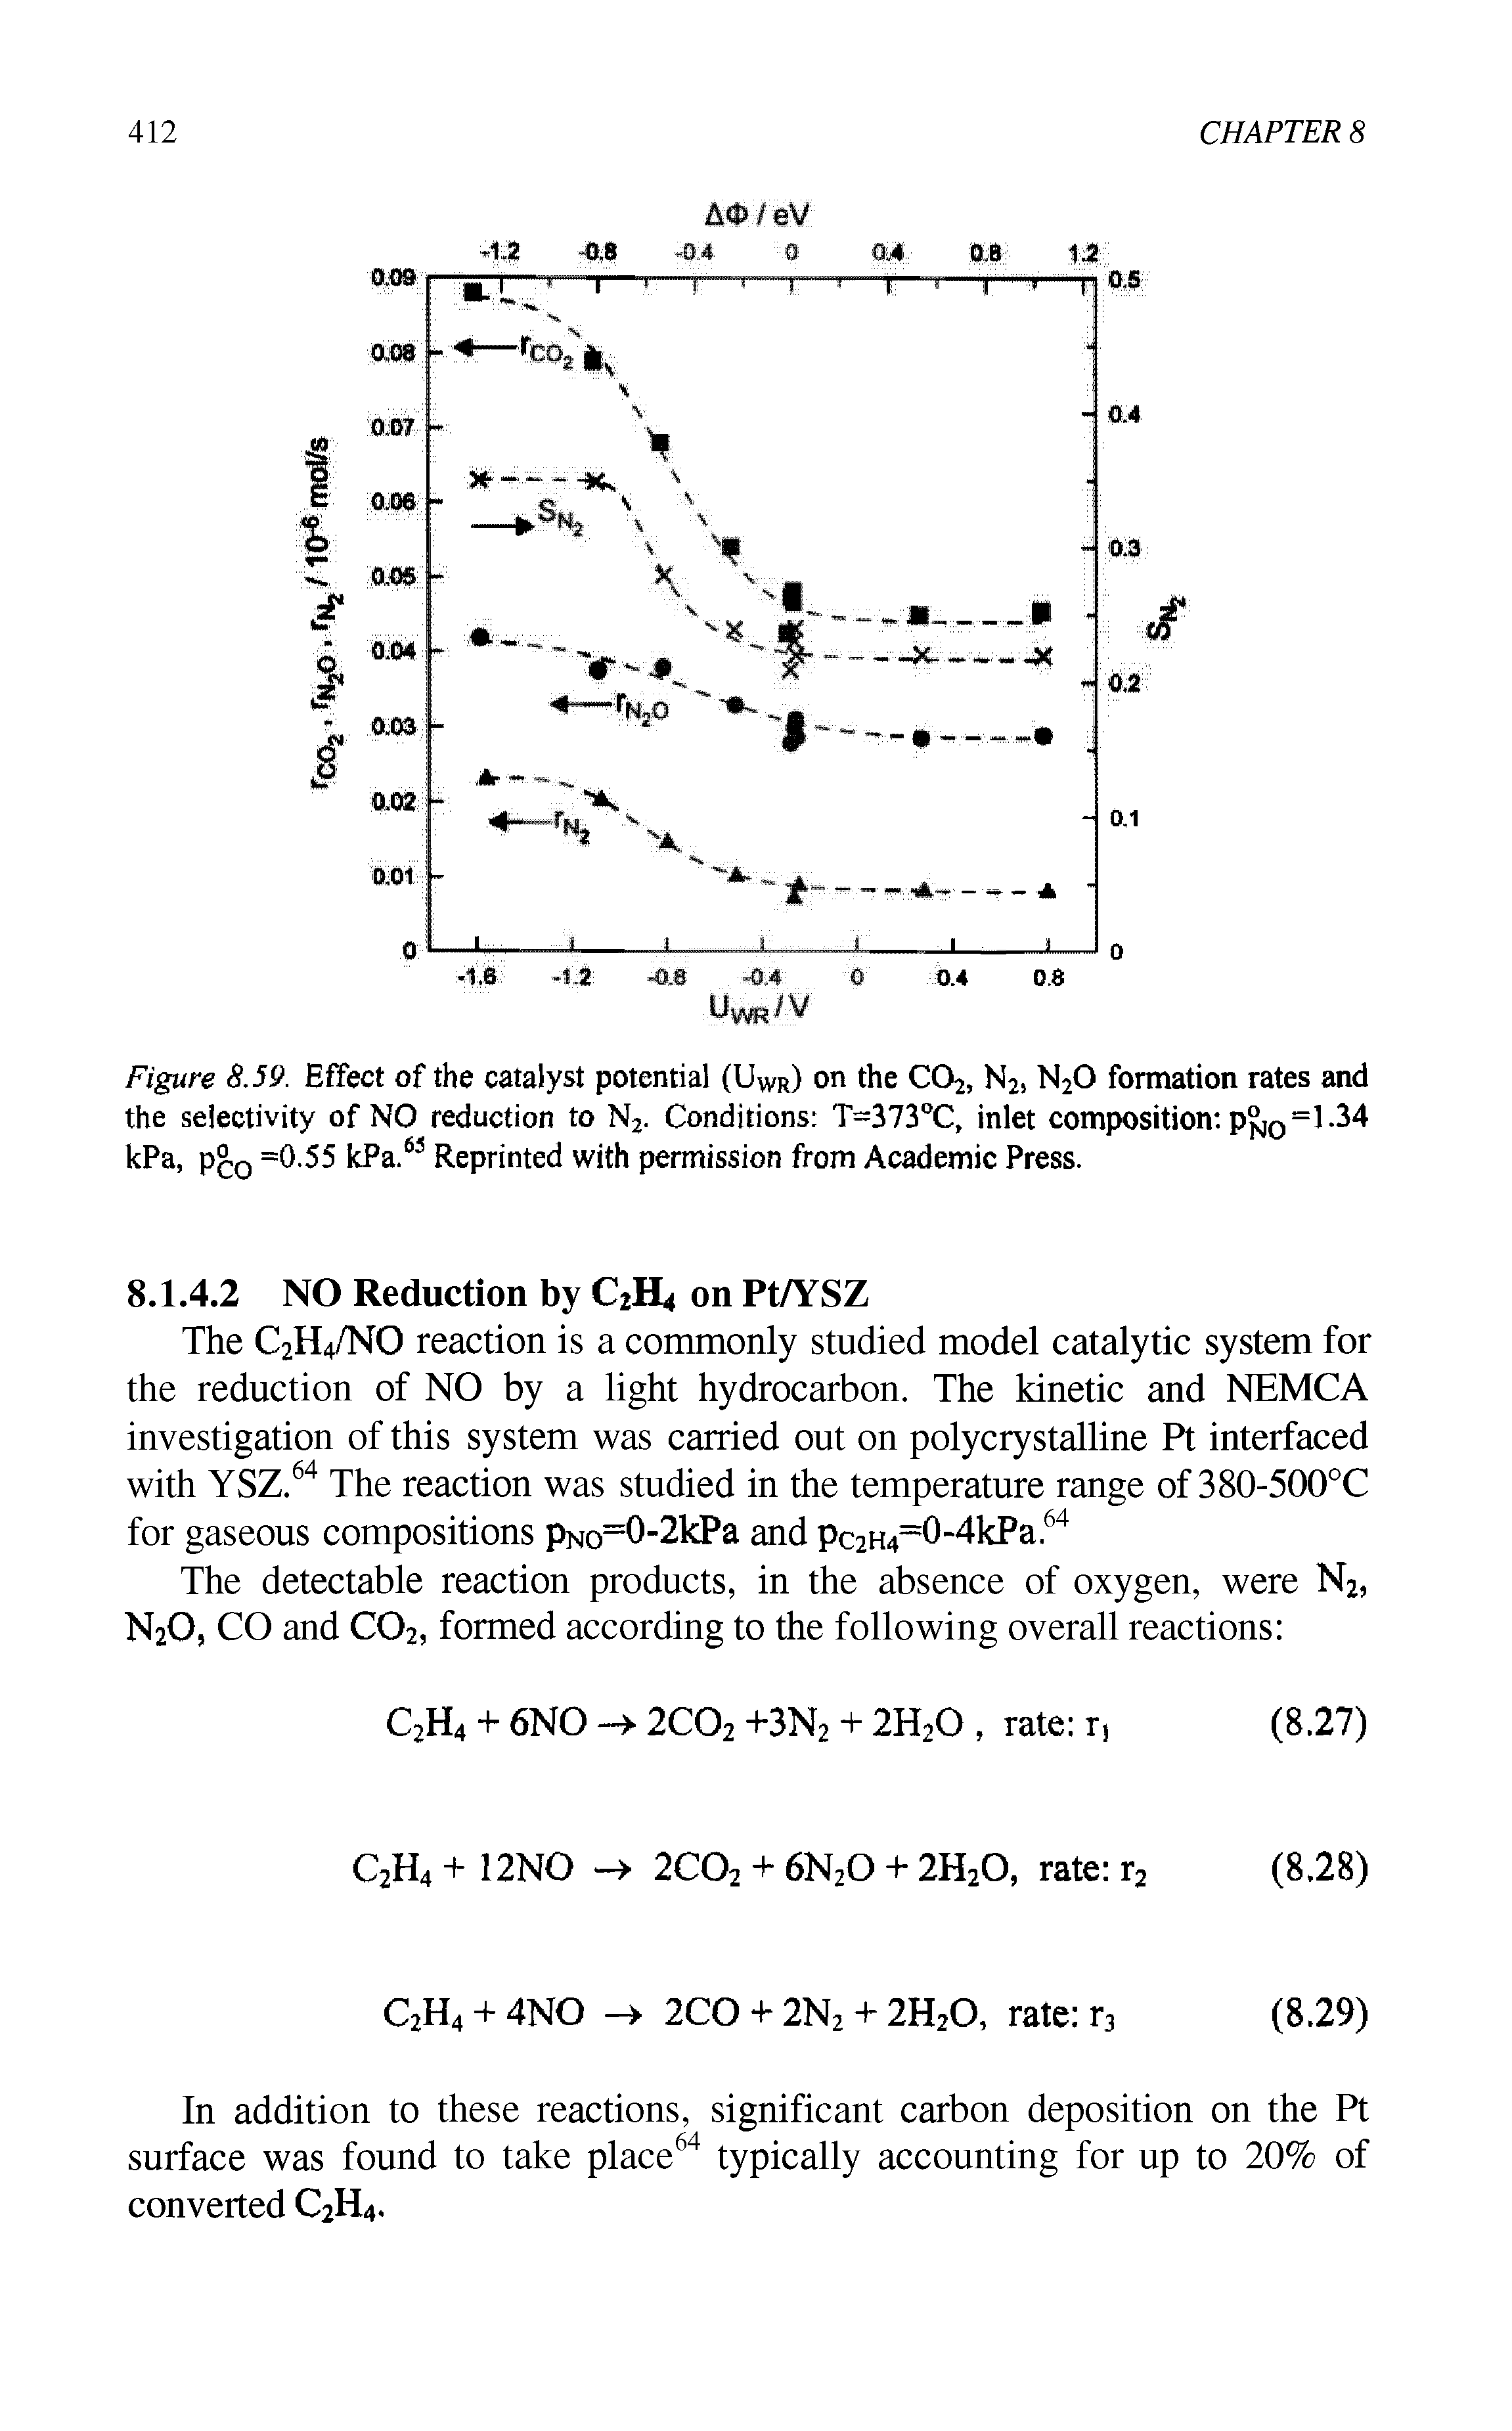 Figure 8.59. Effect of the catalyst potential (UWR) on the C02, N2) N20 formation rates and the selectivity of NO reduction to N2. Conditions T=373°C, inlet composition p 0=1.34 kPa, p 0 =0.55 kPa.63 Reprinted with permission from Academic Press.